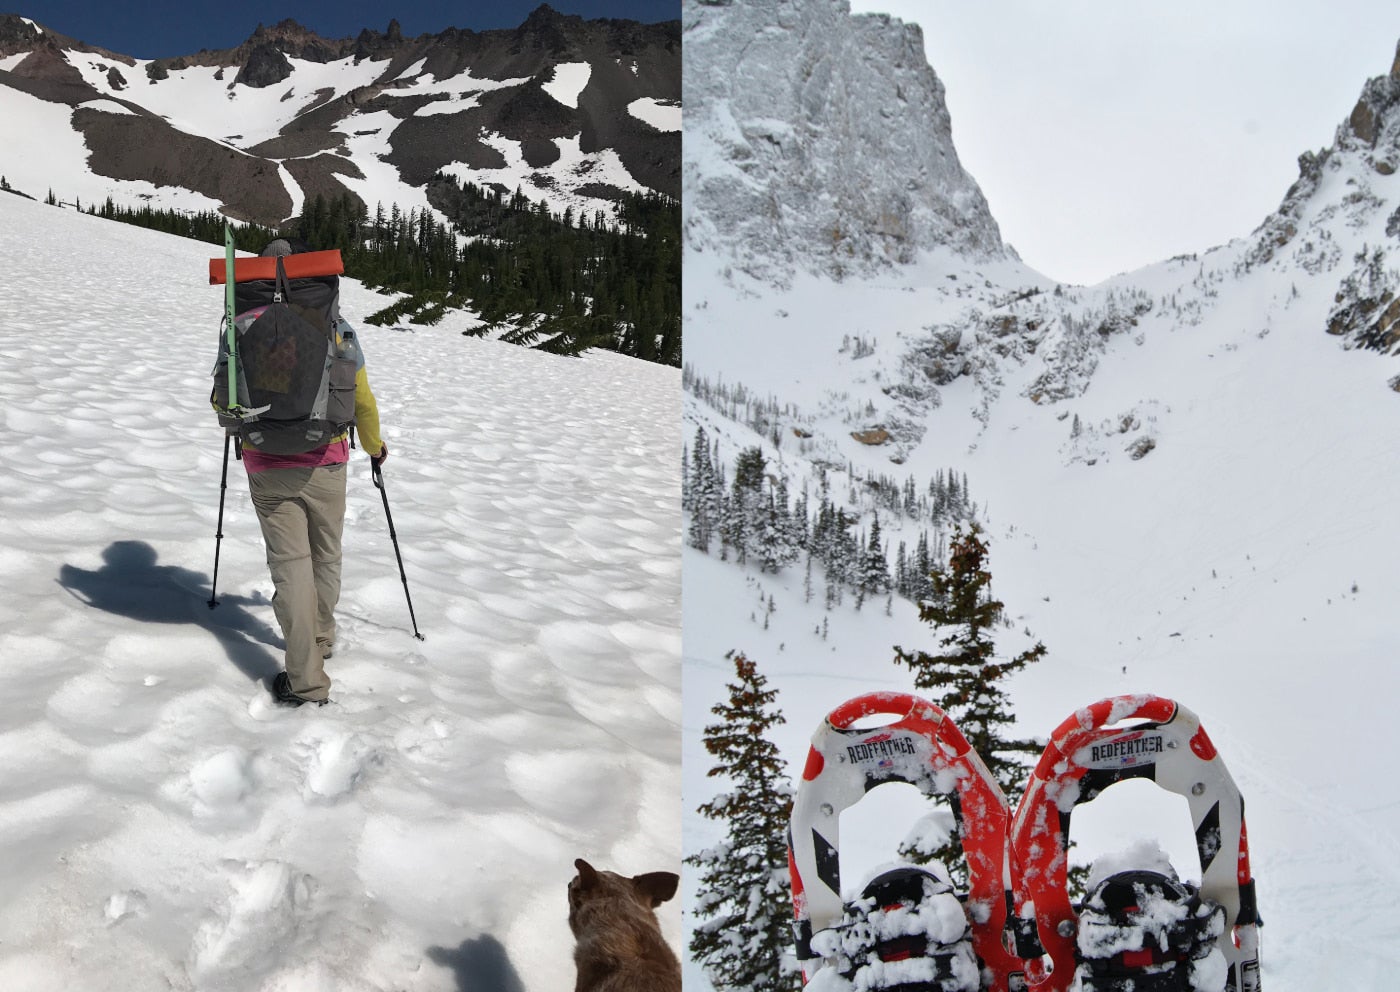 left: a hiker uses poles to walk up a snowfield towards a volcanic mountain on a sunny day. Left: pair of red snowshoes in foreground overlooking snowy mountain valley